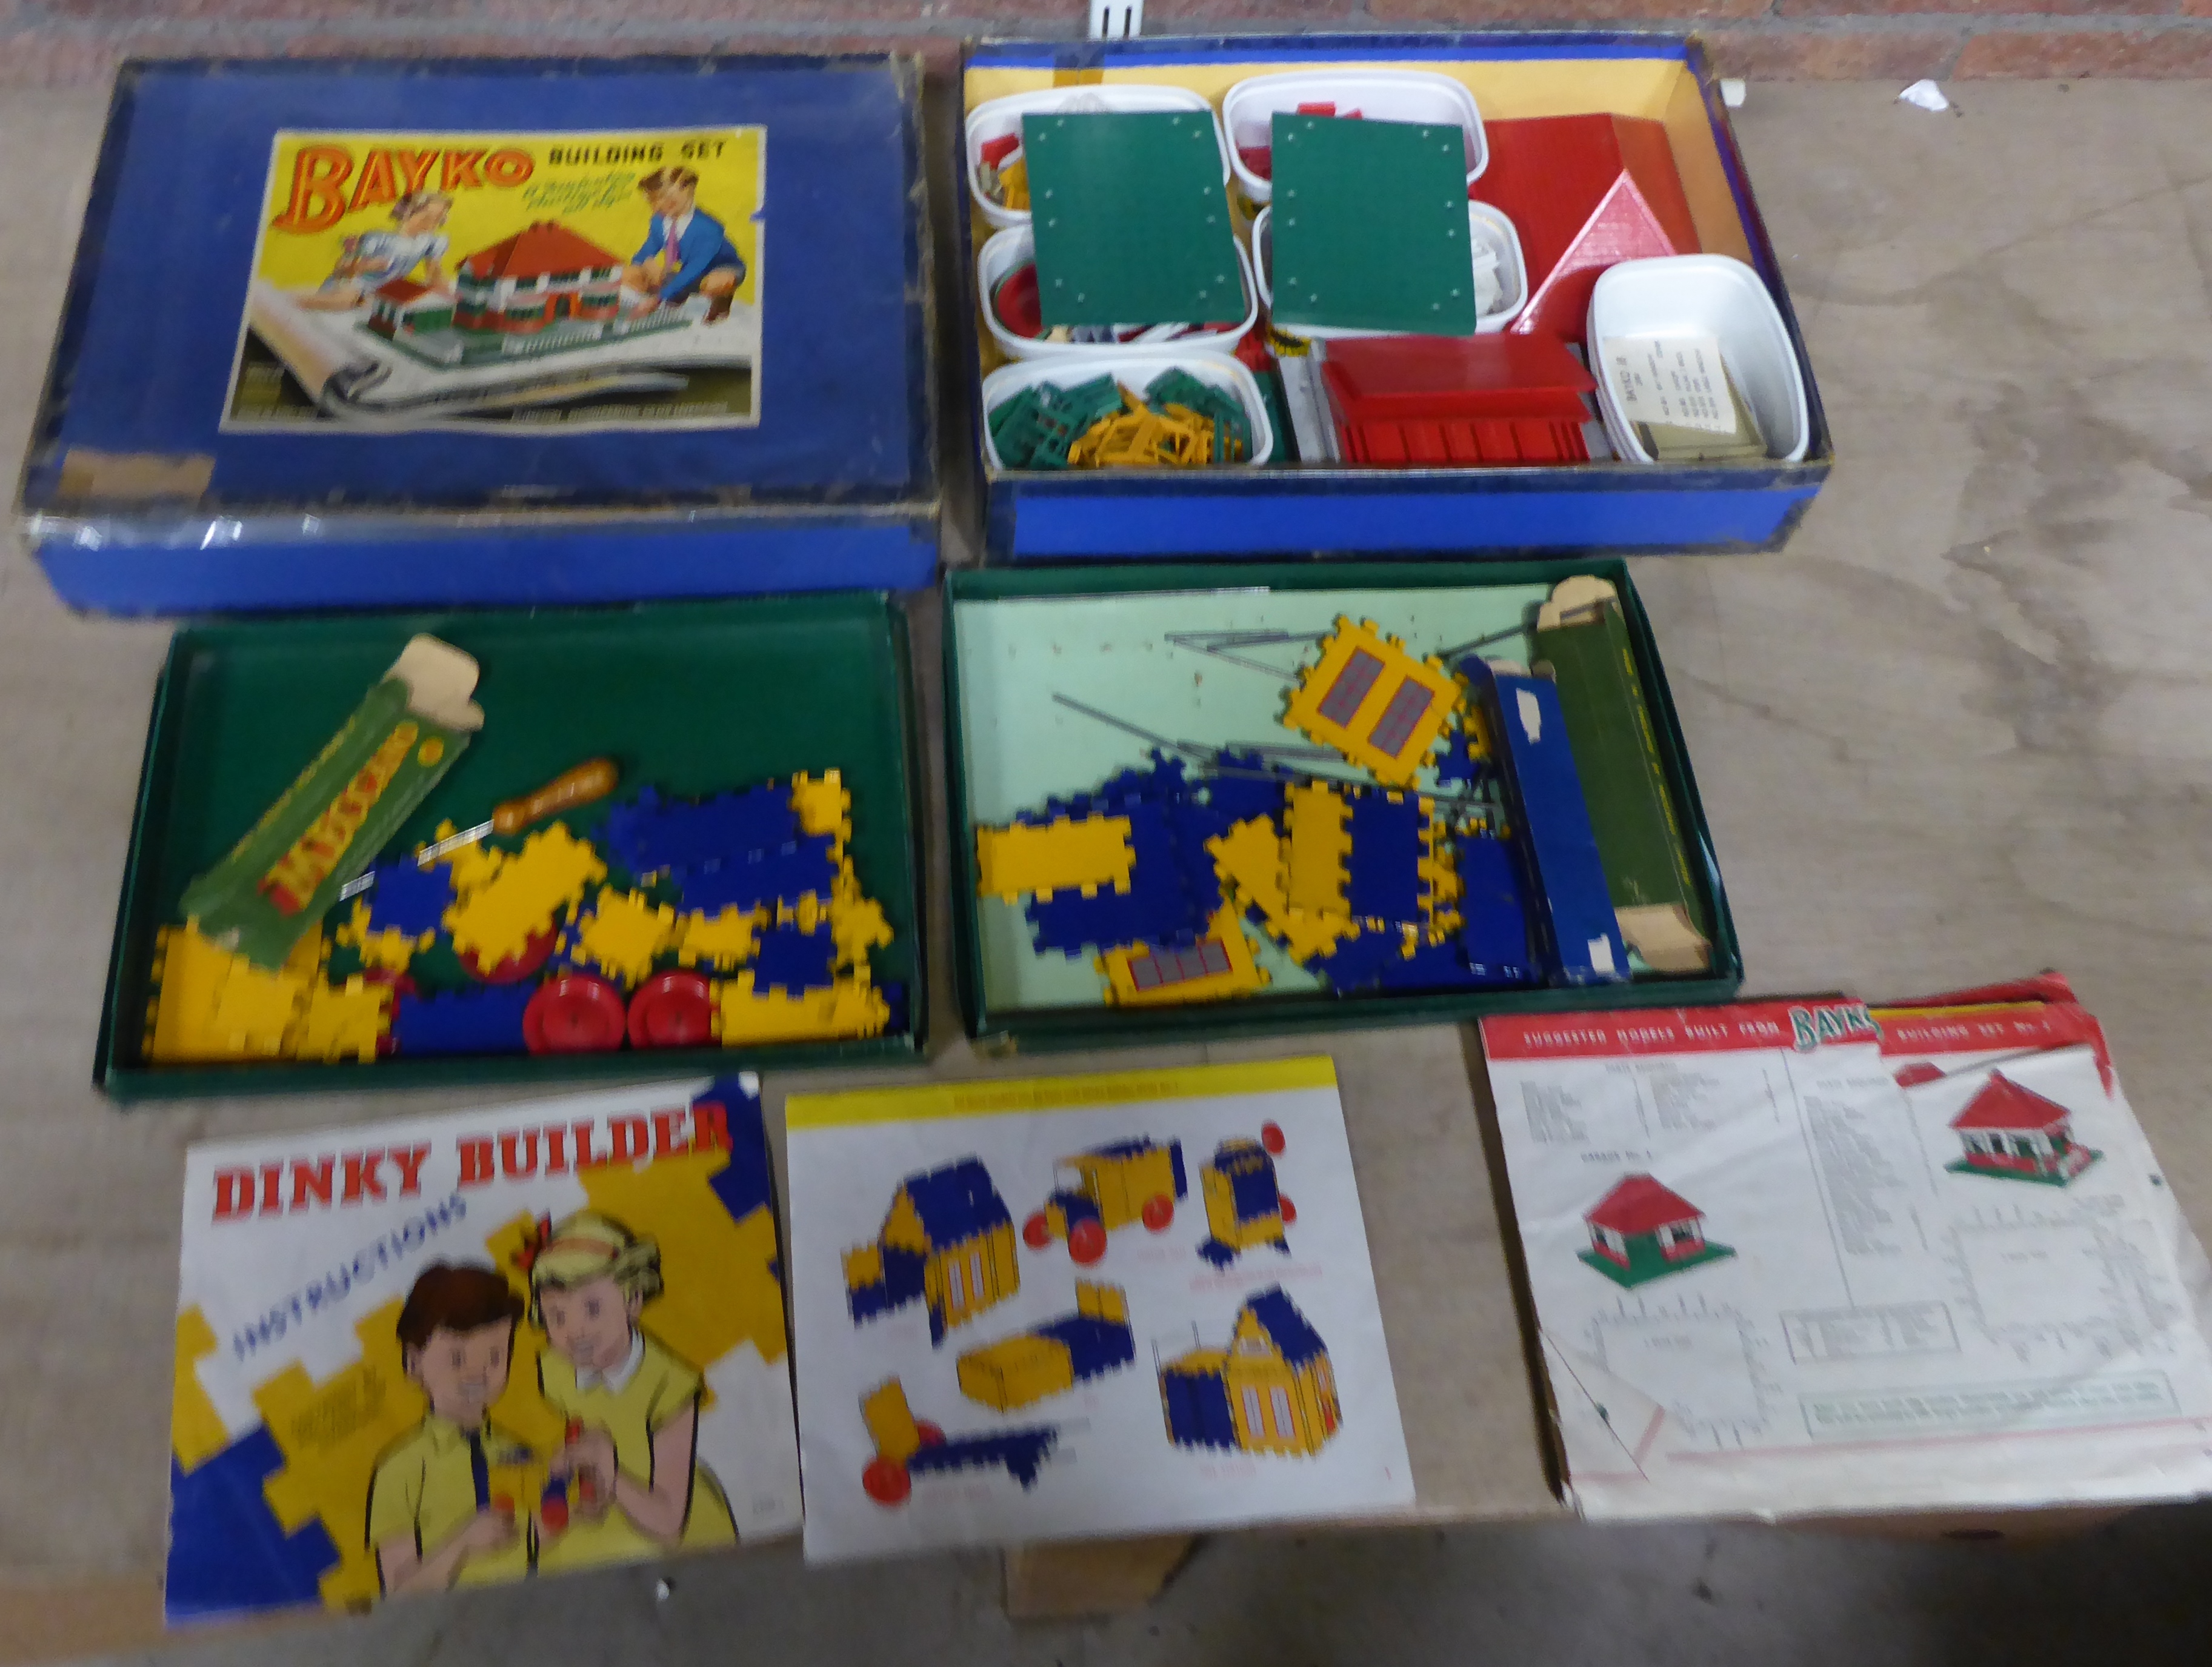 A Bayko Building Set, boxed, and two Dinky Builder Boxes and contents.